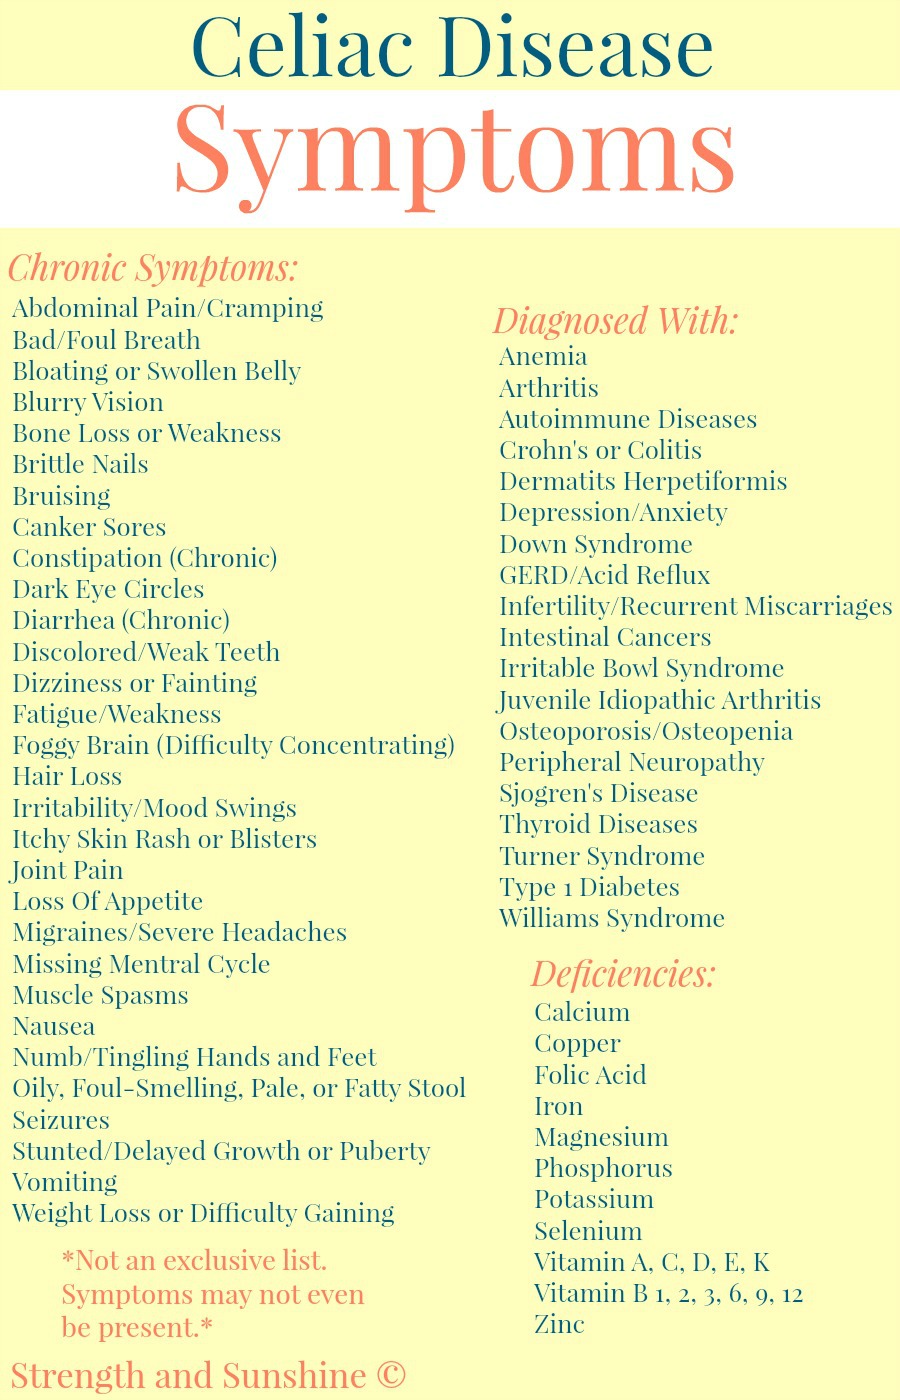 The Signs & Symptoms of Celiac Disease | Strength and Sunshine @RebeccaGF666 Navigating your way to proper diagnosis, here are the major signs and symptoms of celiac disease to take into consideration before visiting your doctor for thorough celiac testing and switching to a gluten-free lifestyle and diet.